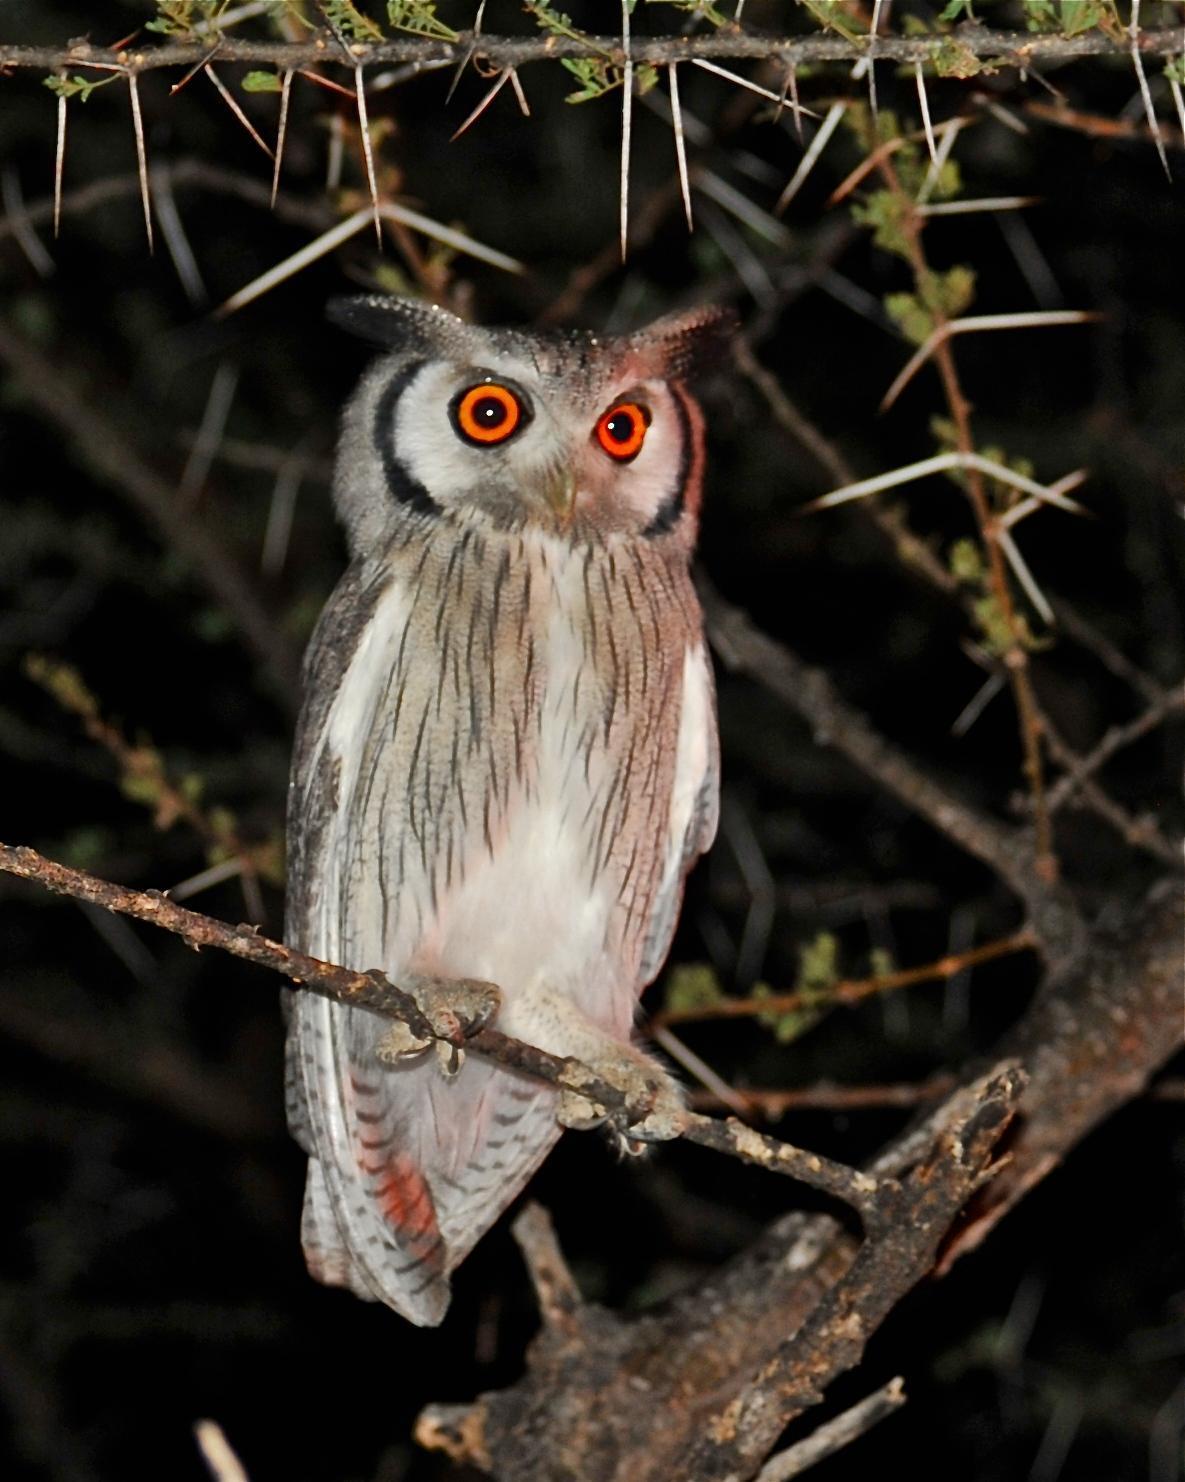 Southern White-faced Owl Photo by Gerald Friesen